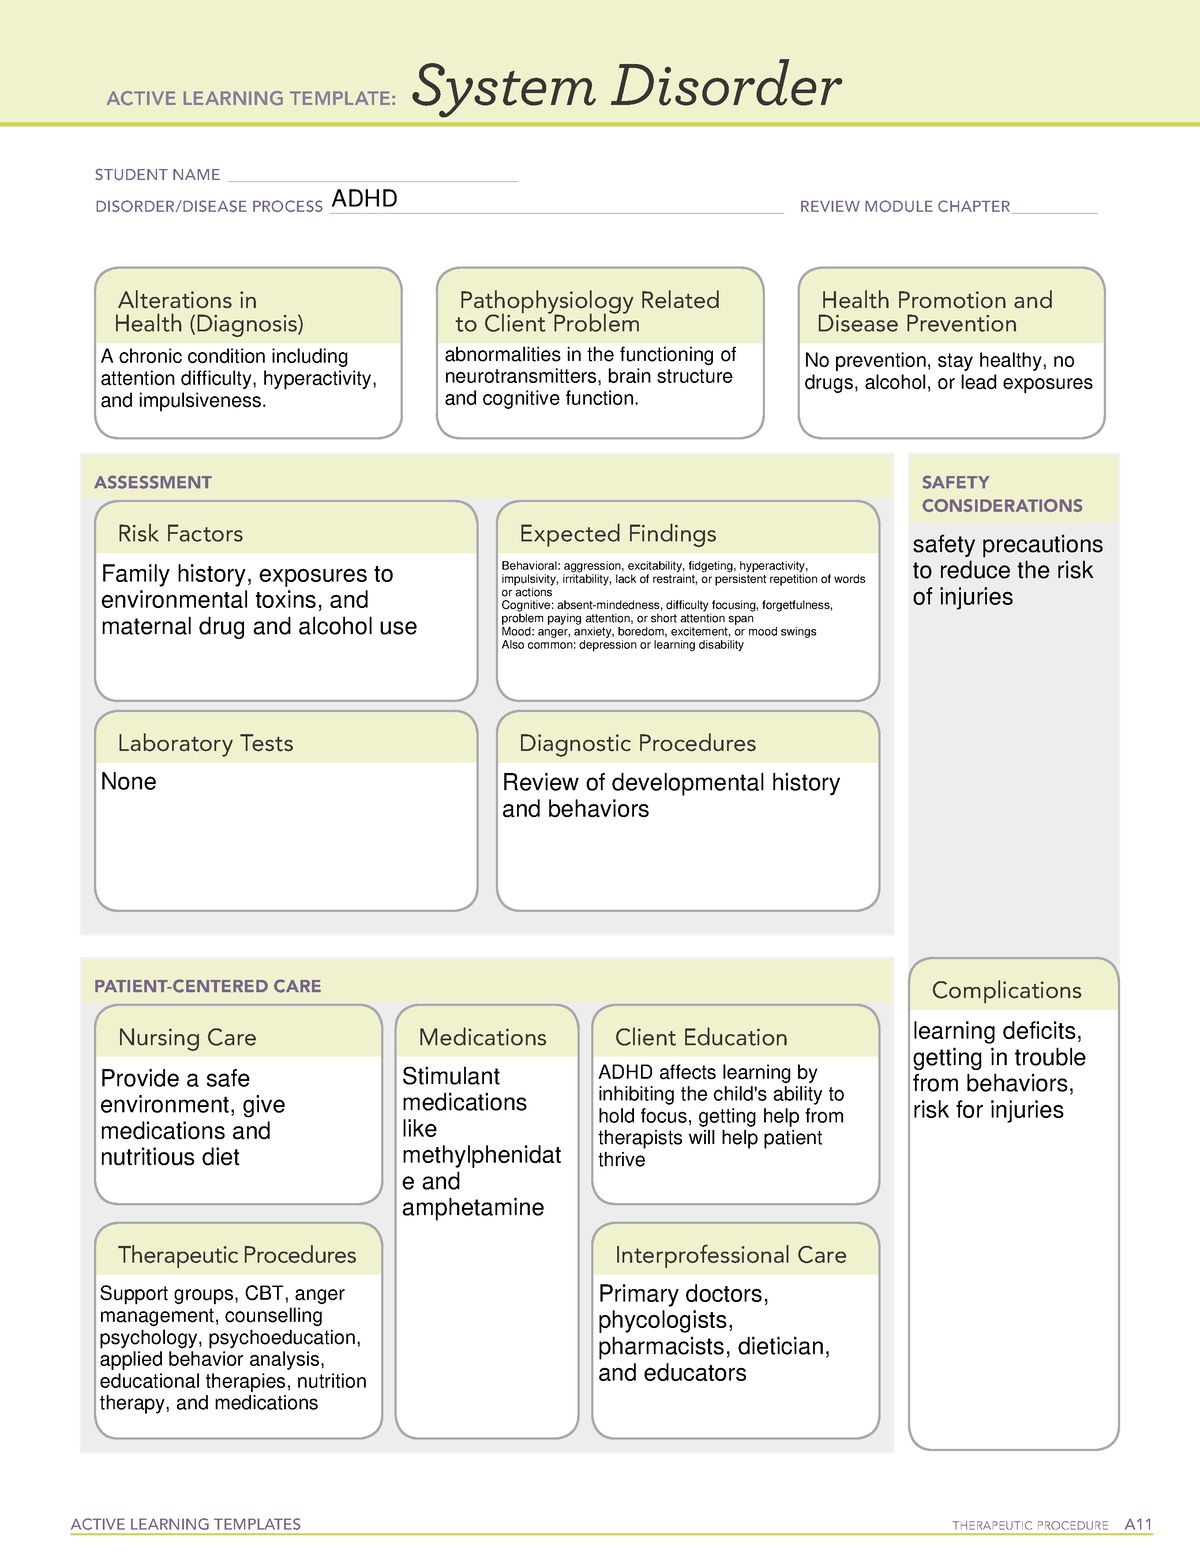 ADHD System Disorder Template ATI ACTIVE LEARNING TEMPLATE System